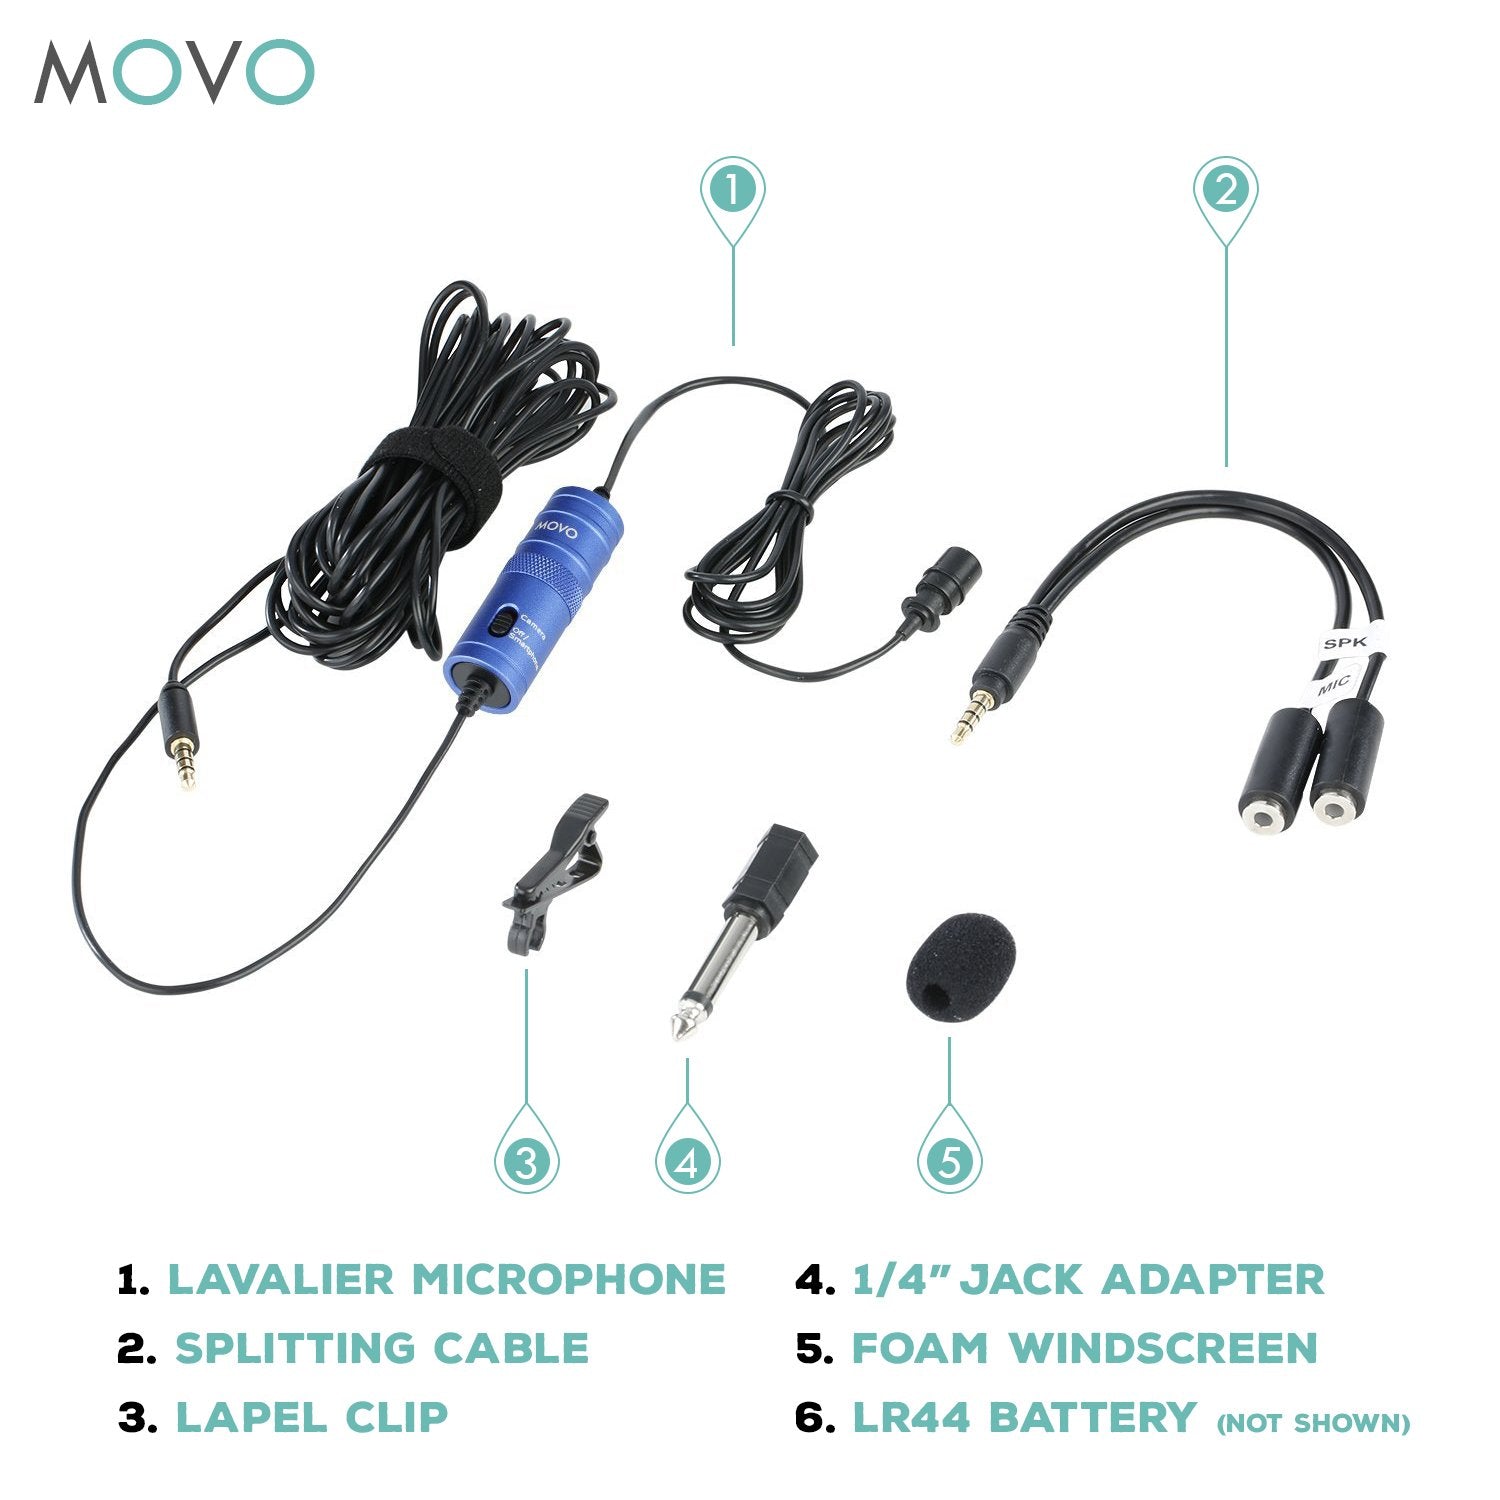 Movo LV1 Lavalier Lapel Clip-on Omnidirectional Condenser Microphone with Headphone Monitoring for DSLR Cameras, Camcorders, iPhone and Android Smartphones (Blue)  - Like New